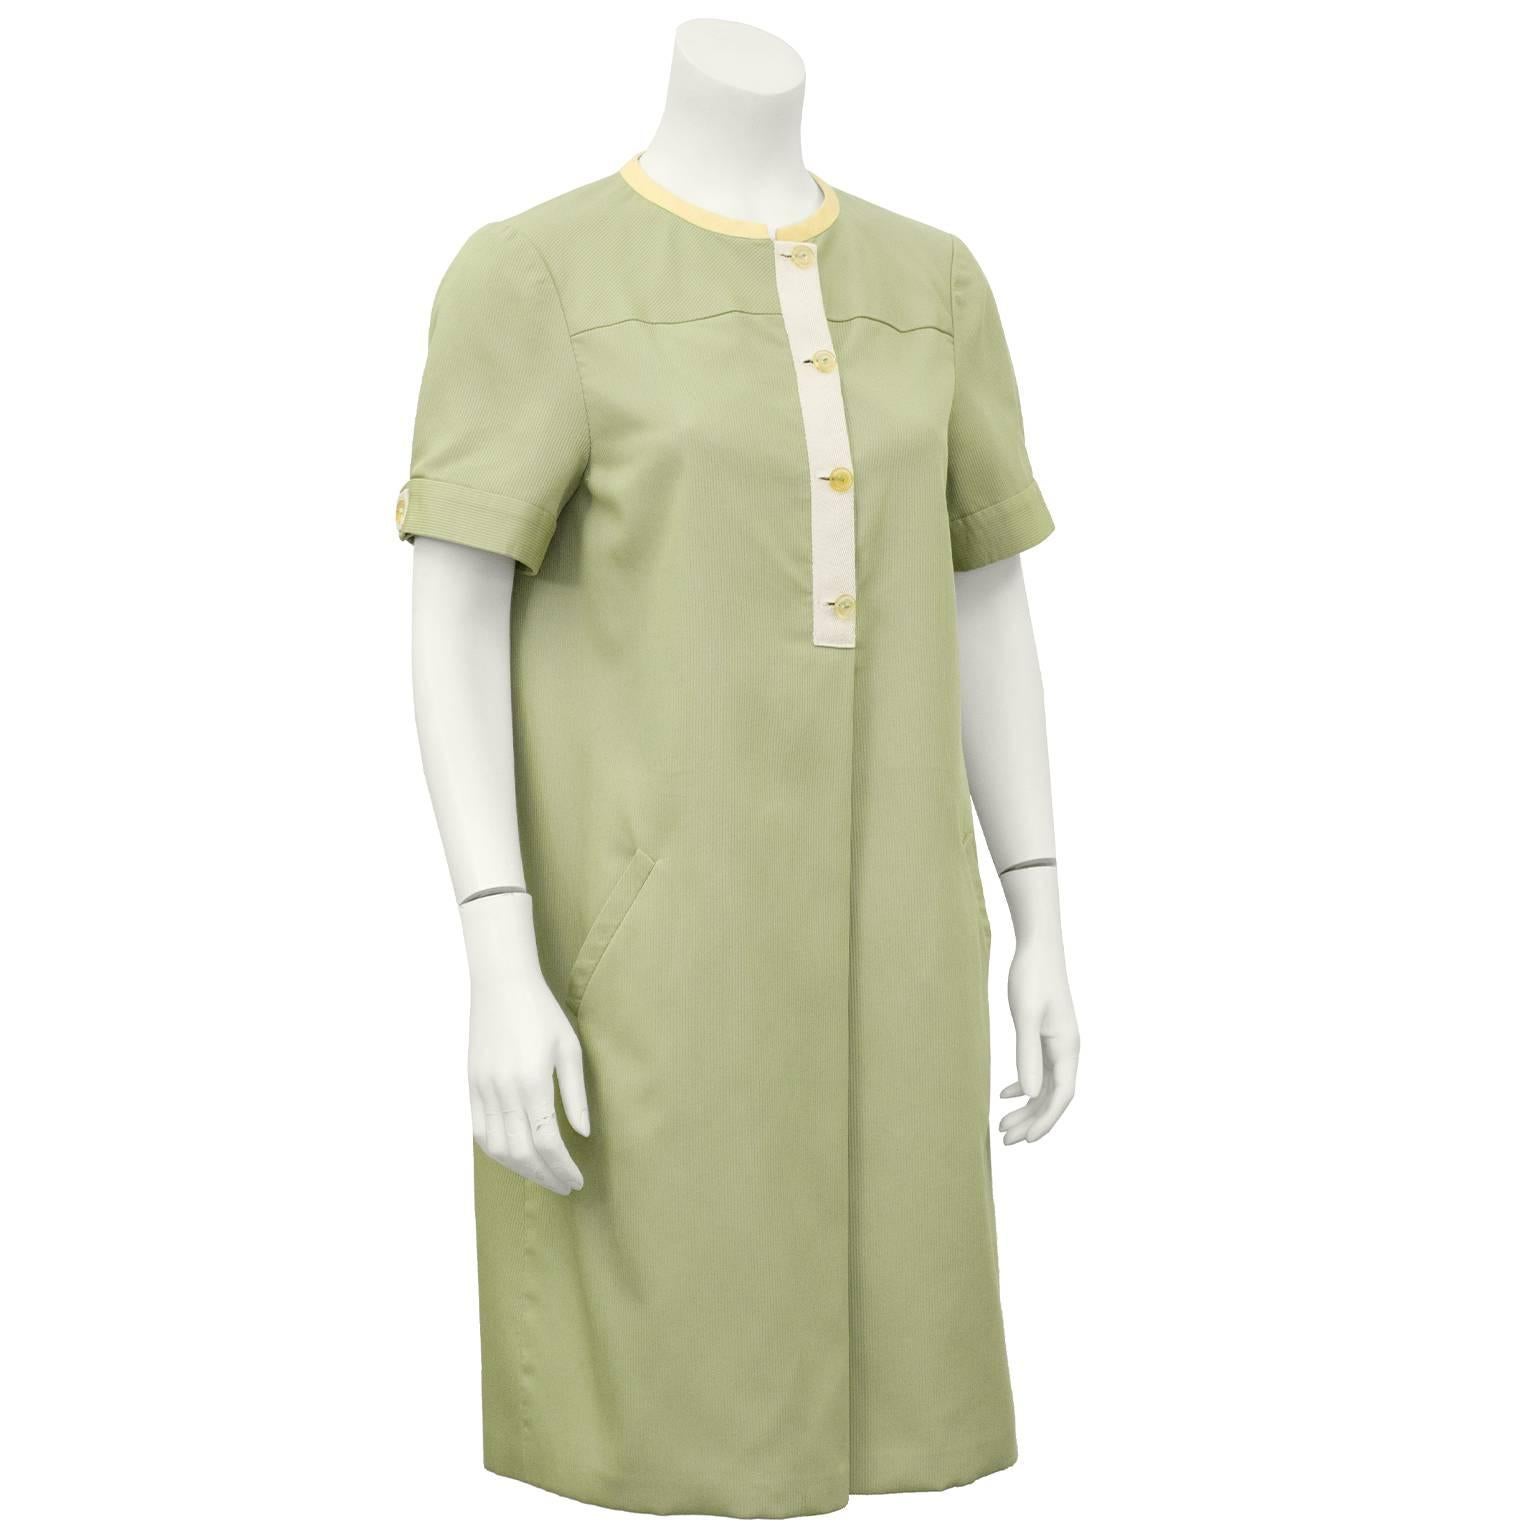 1980's Geoffrey Beene day dress in a sage green ribbed silk. Contrasting butter yellow linen trim around neckline. Ribbing in fabric at yoke is diagonal, while rest of dress is vertical. One inverted pleat and pockets. Lined in adorable butter